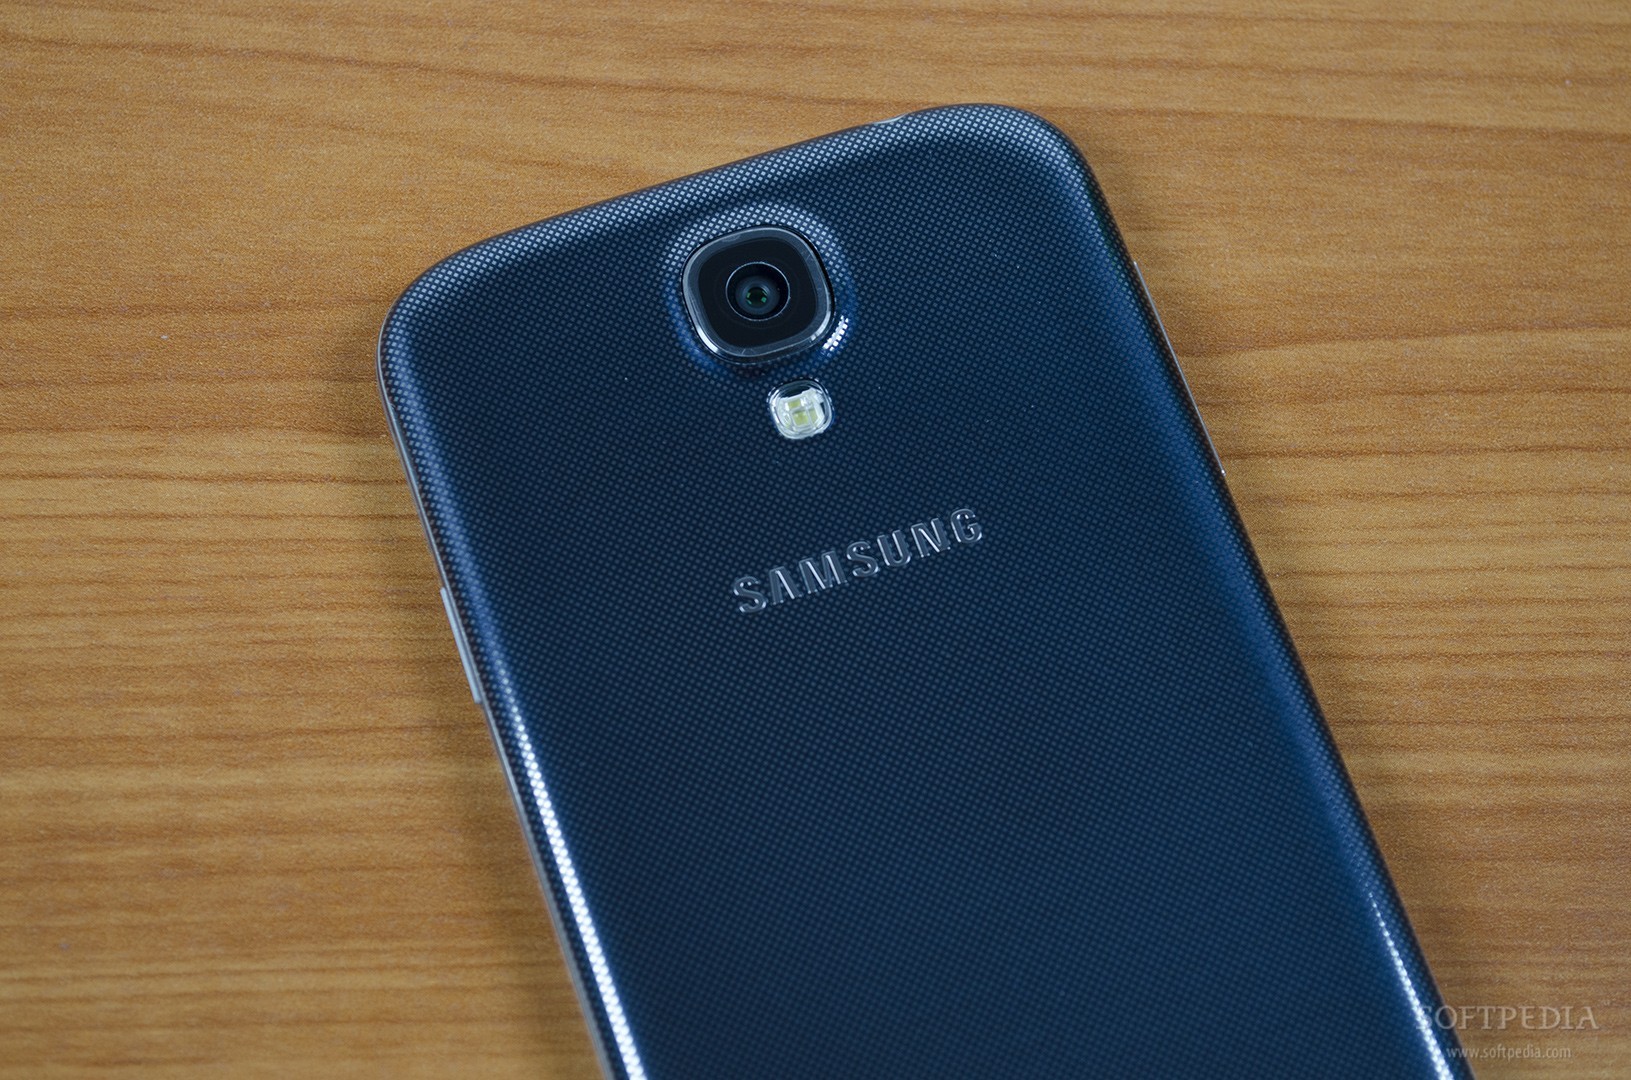 Verizon Releasing Android 4 4 2 Kitkat Update For Galaxy S4 S4 Mini Note Ii And Note 3 In Late May